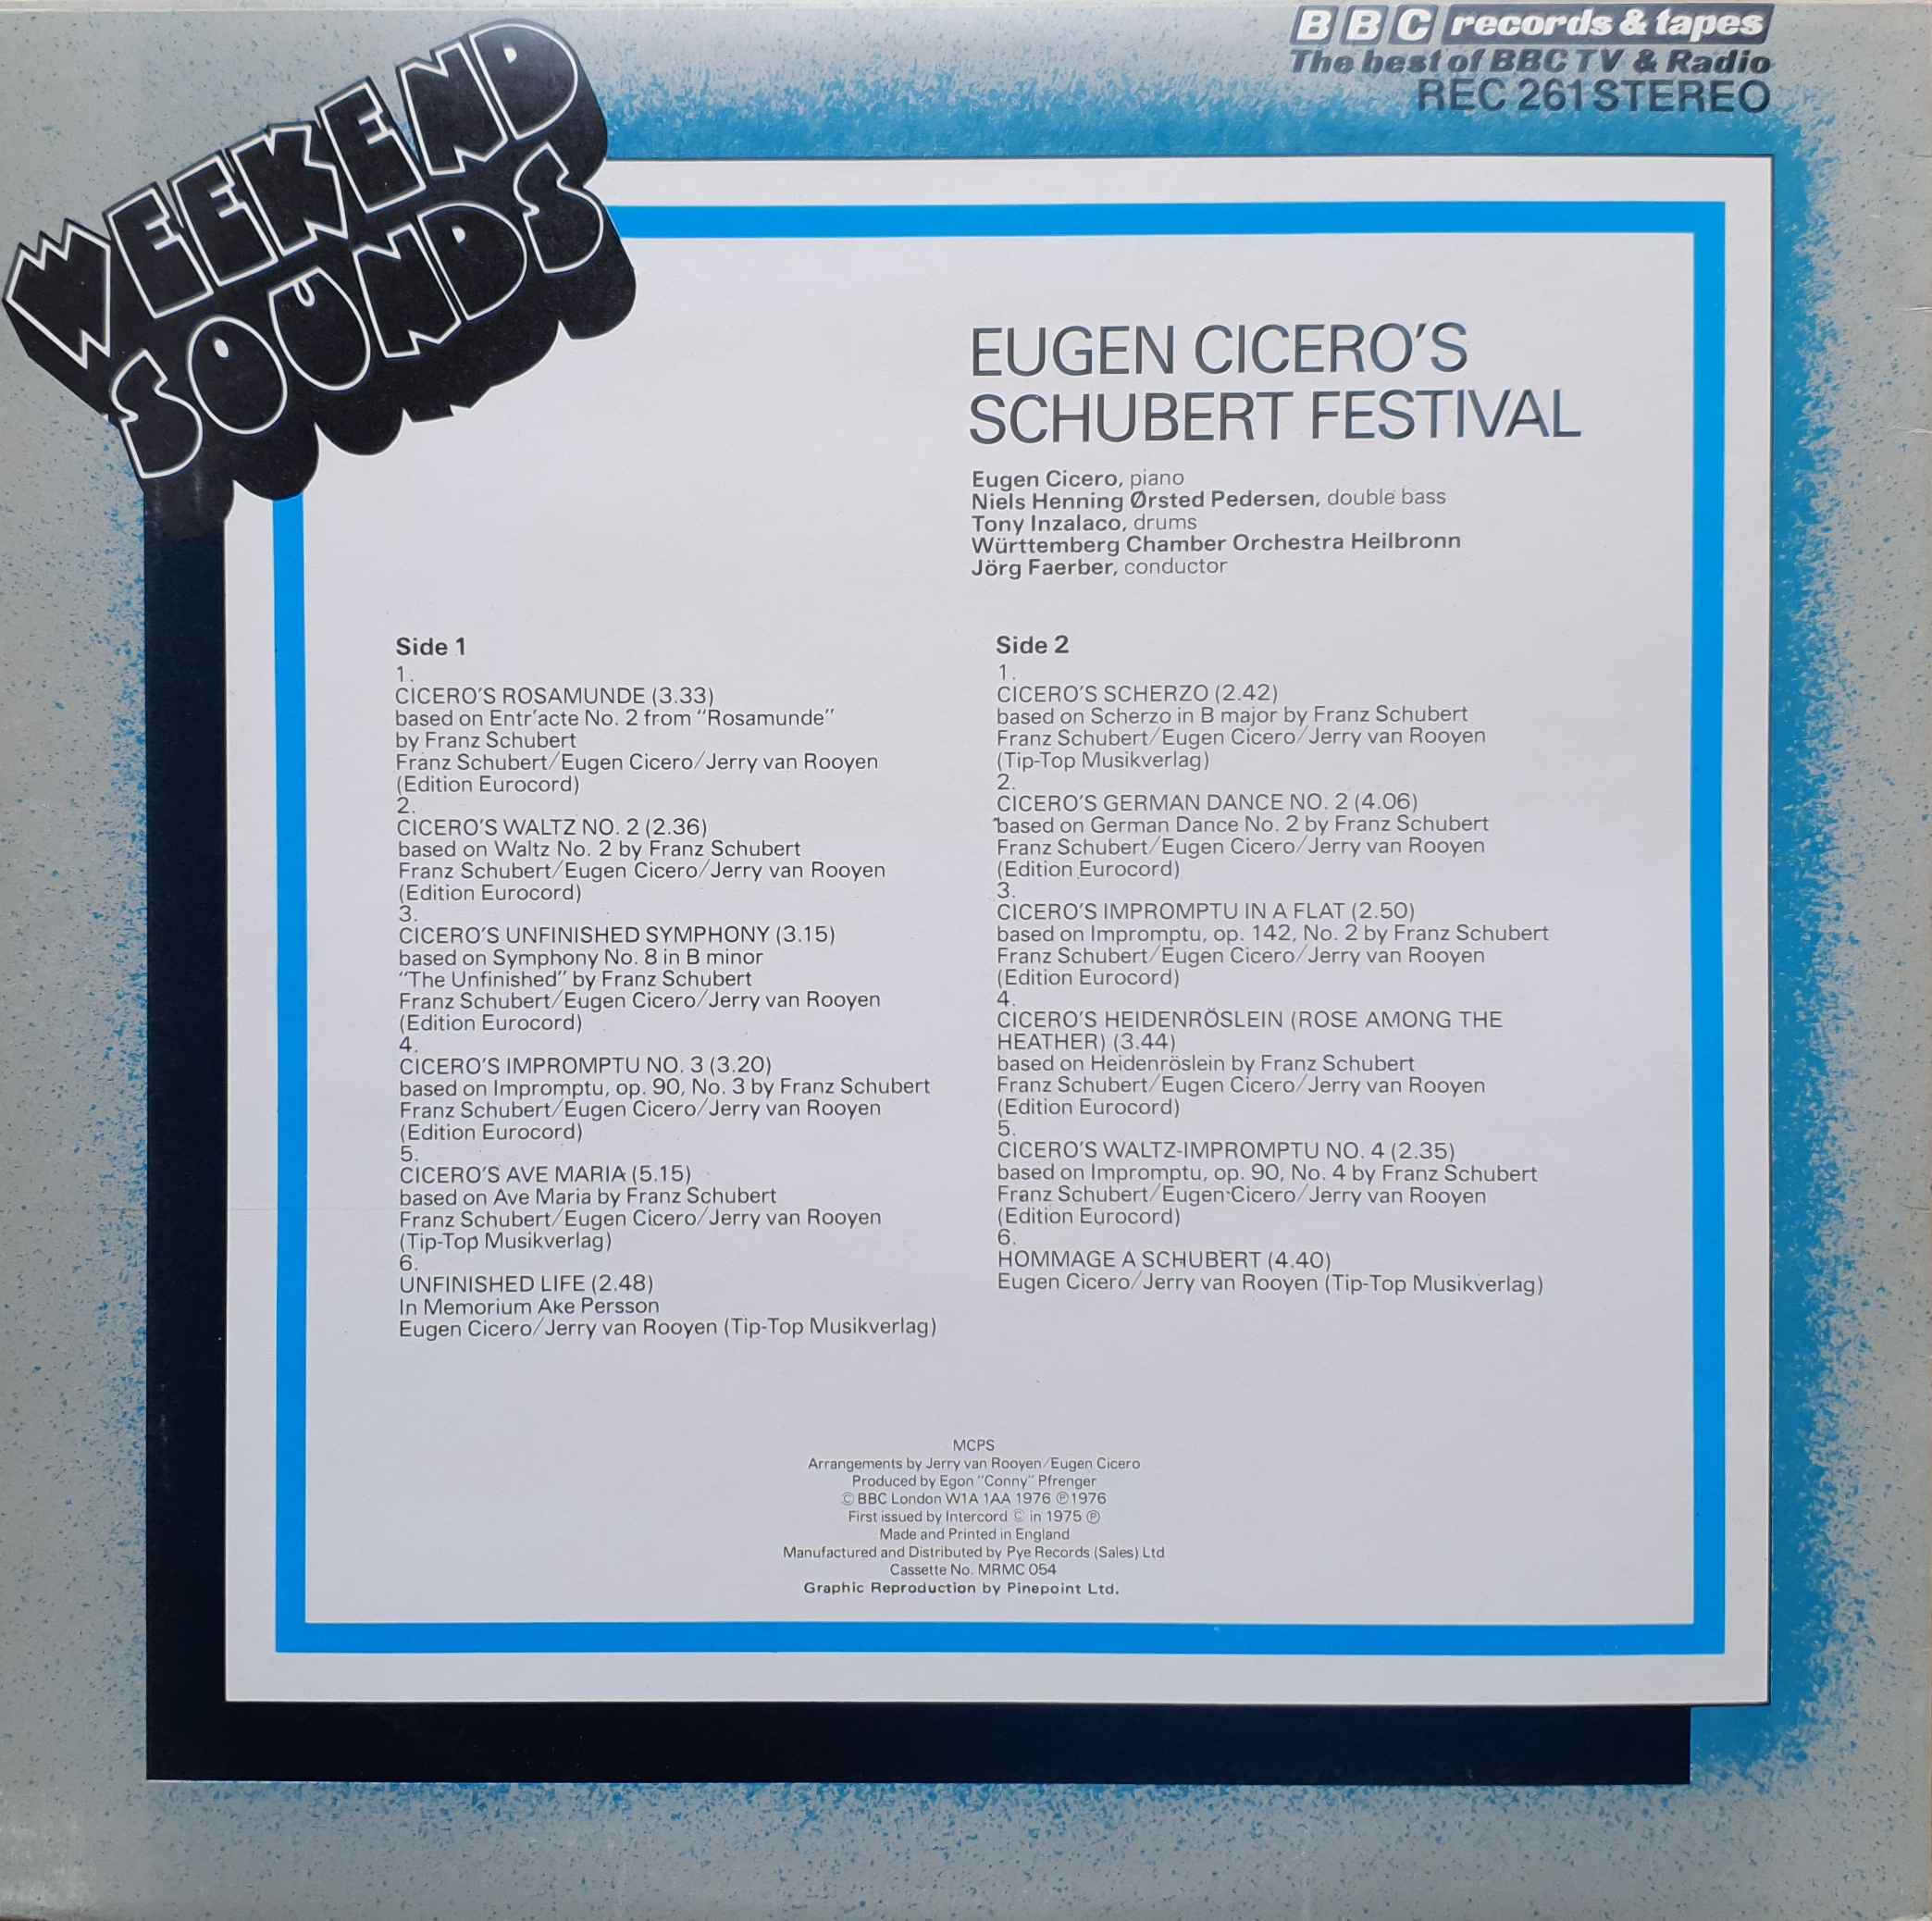 Picture of REC 261 Eugen Cicero's Schubert Festival by artist Eugen Cicero from the BBC records and Tapes library